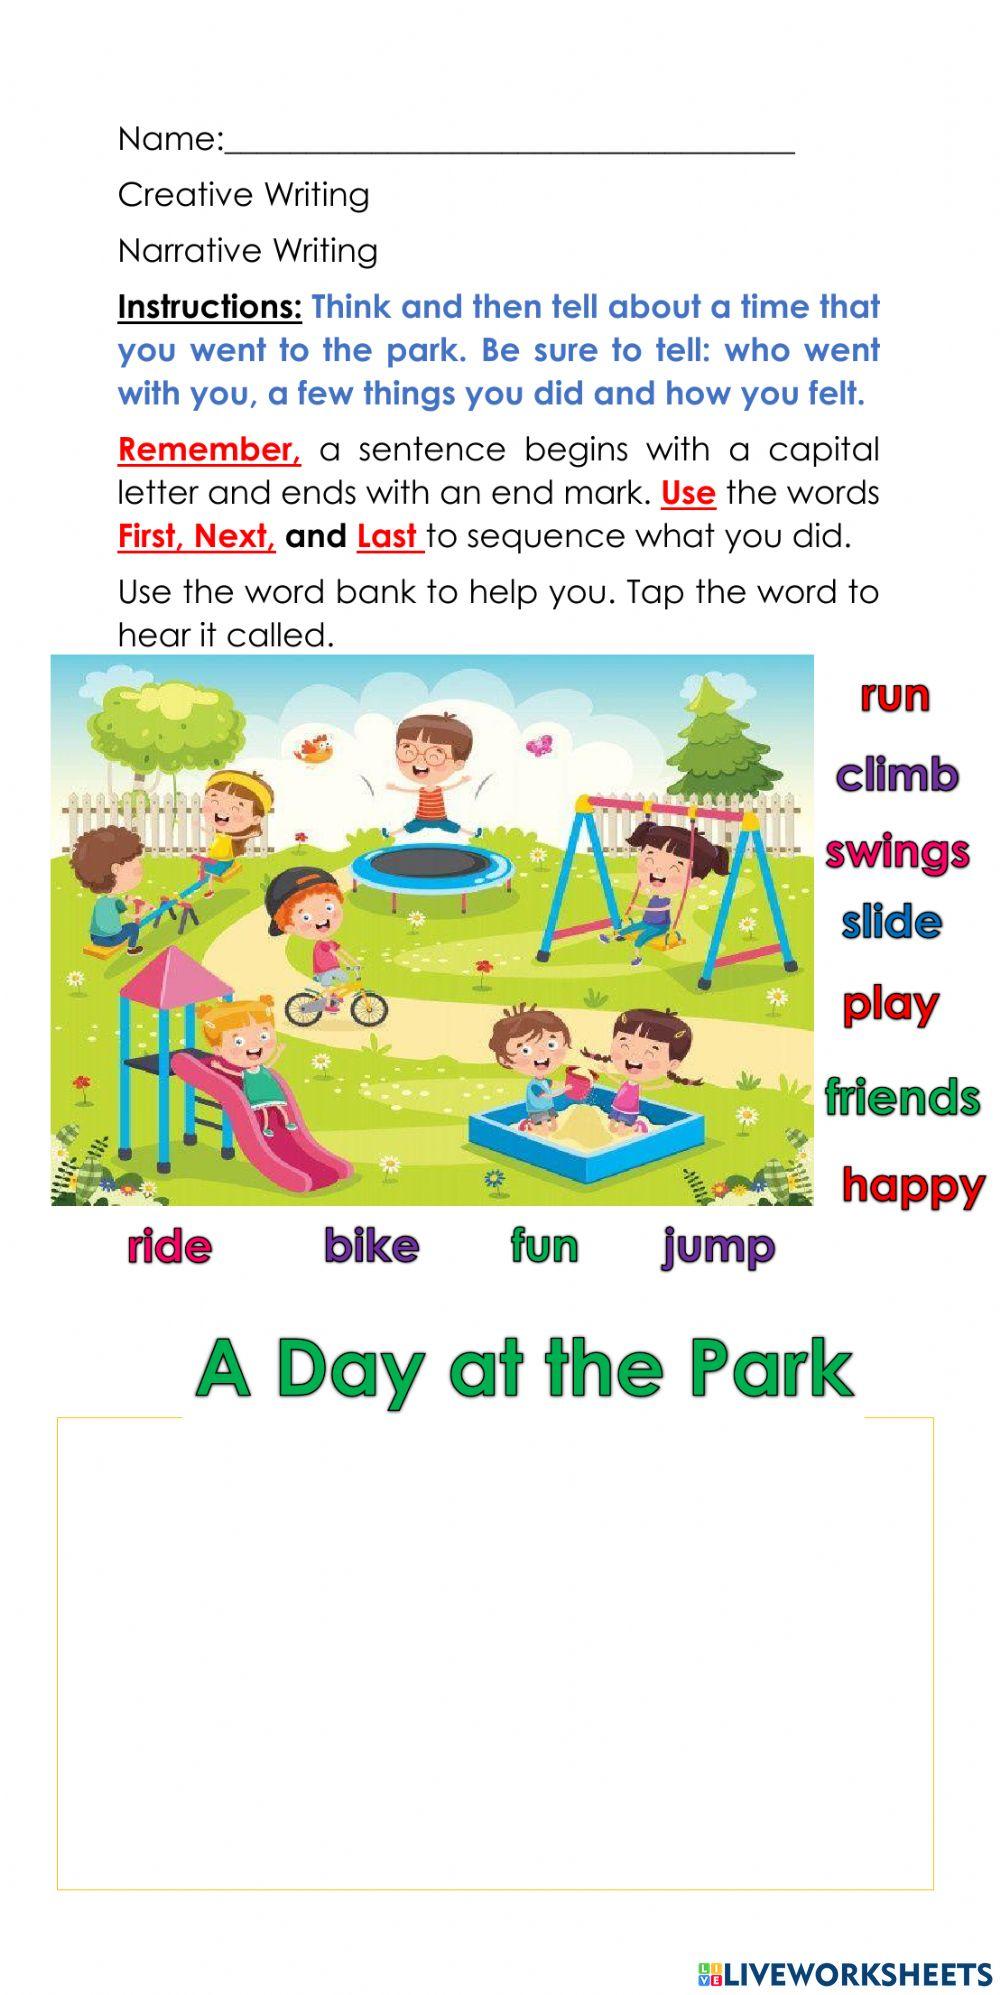 Narrative Writing - A Day at the Park